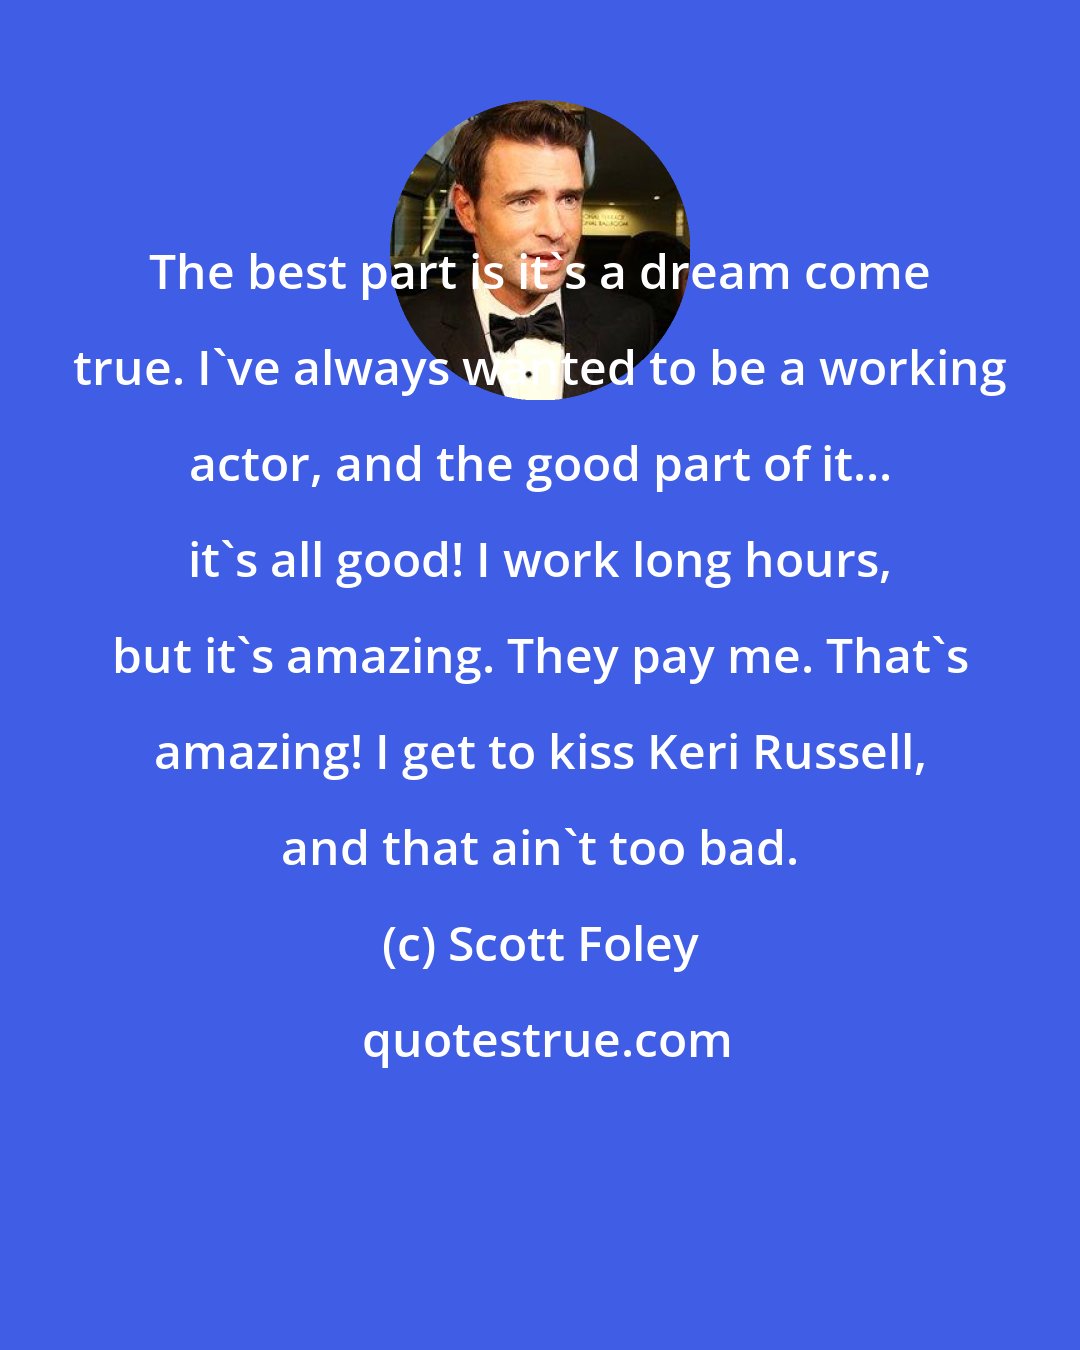 Scott Foley: The best part is it's a dream come true. I've always wanted to be a working actor, and the good part of it... it's all good! I work long hours, but it's amazing. They pay me. That's amazing! I get to kiss Keri Russell, and that ain't too bad.